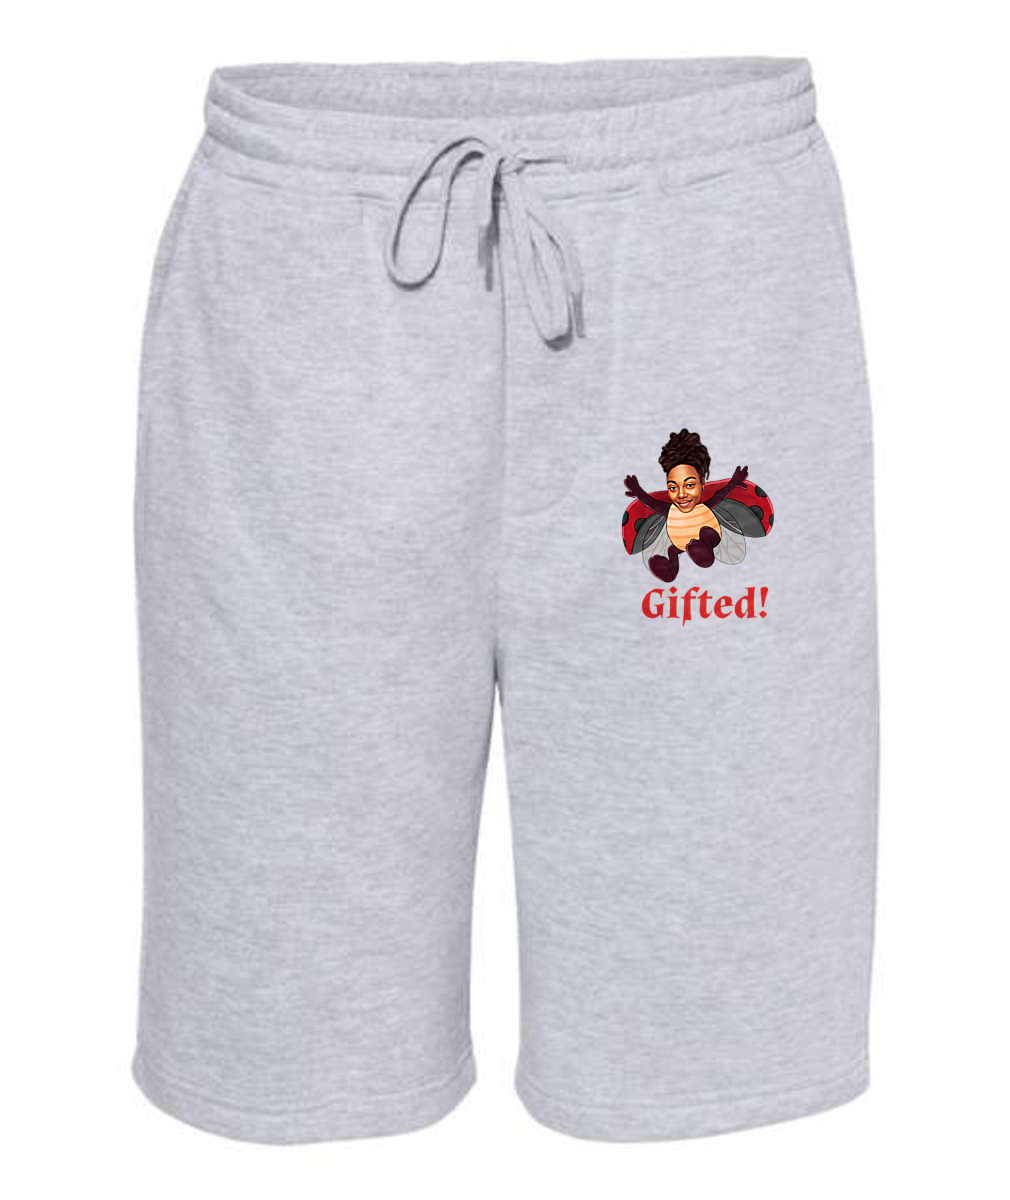 Gifted by Brit. - Midweight Fleece Shorts or Similar